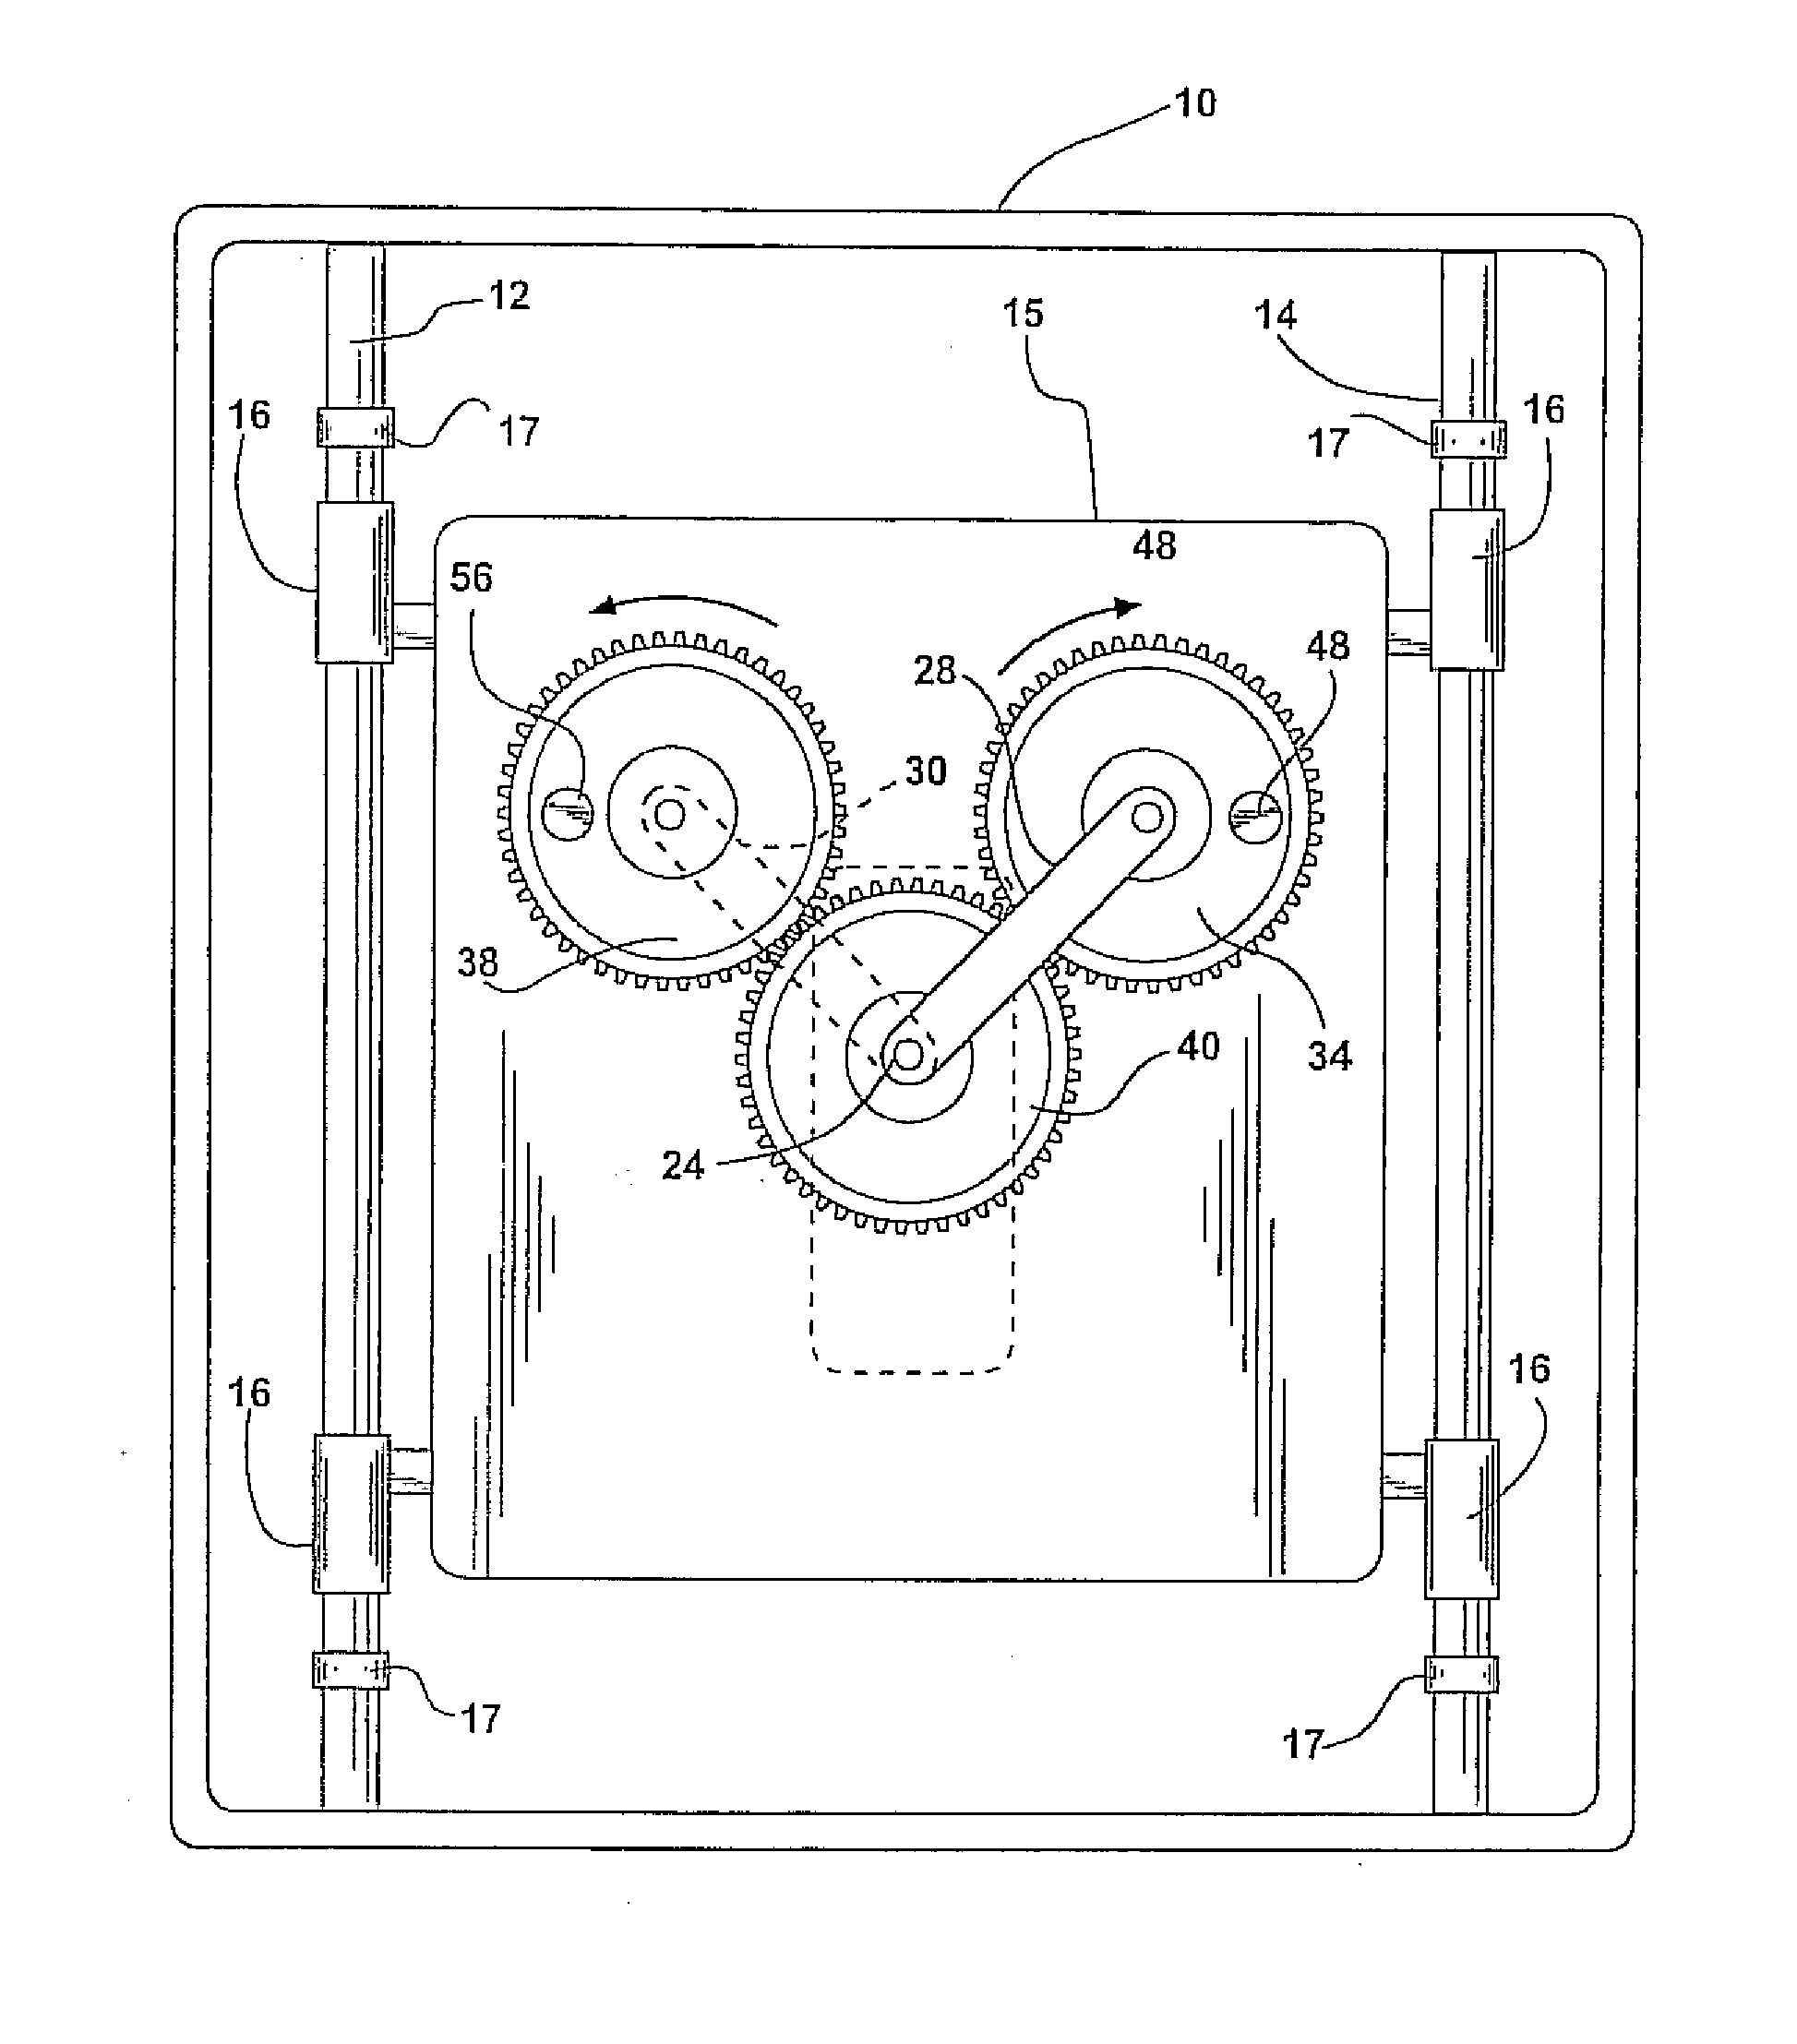 Propulsion device employing conversion of rotary motion into a unidirectional linear force